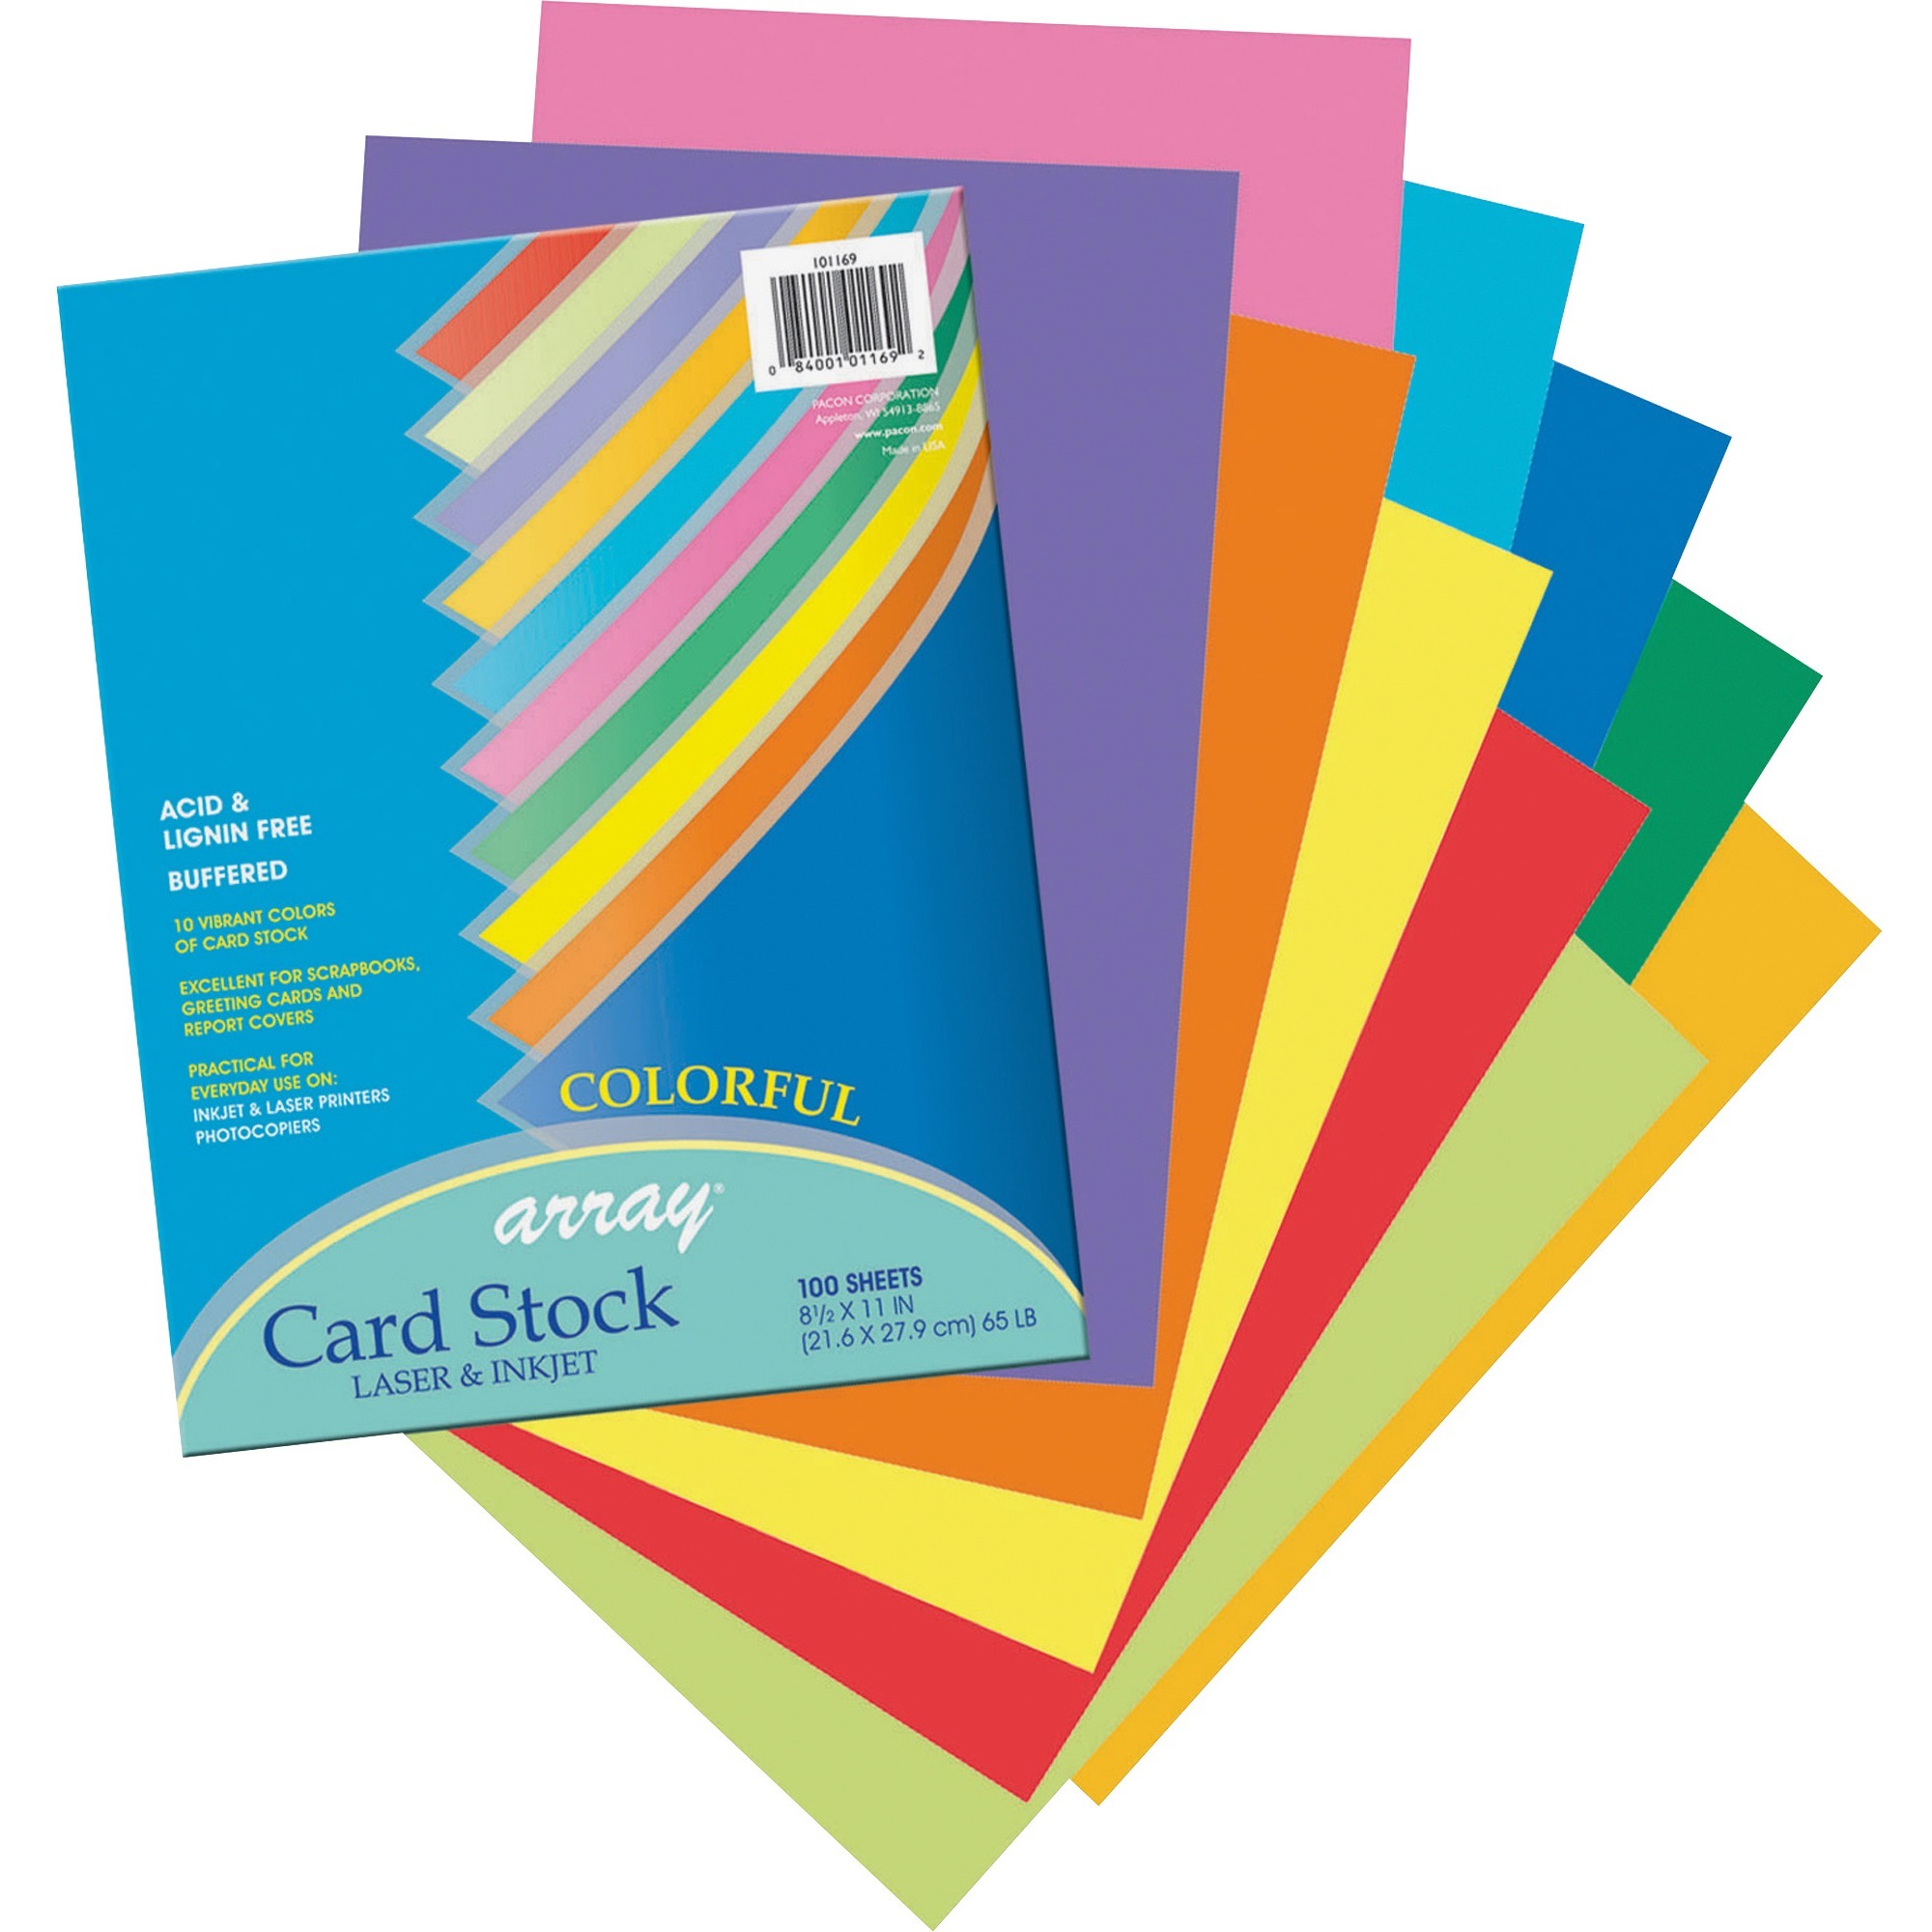 colorful-card-stock-ready-set-start